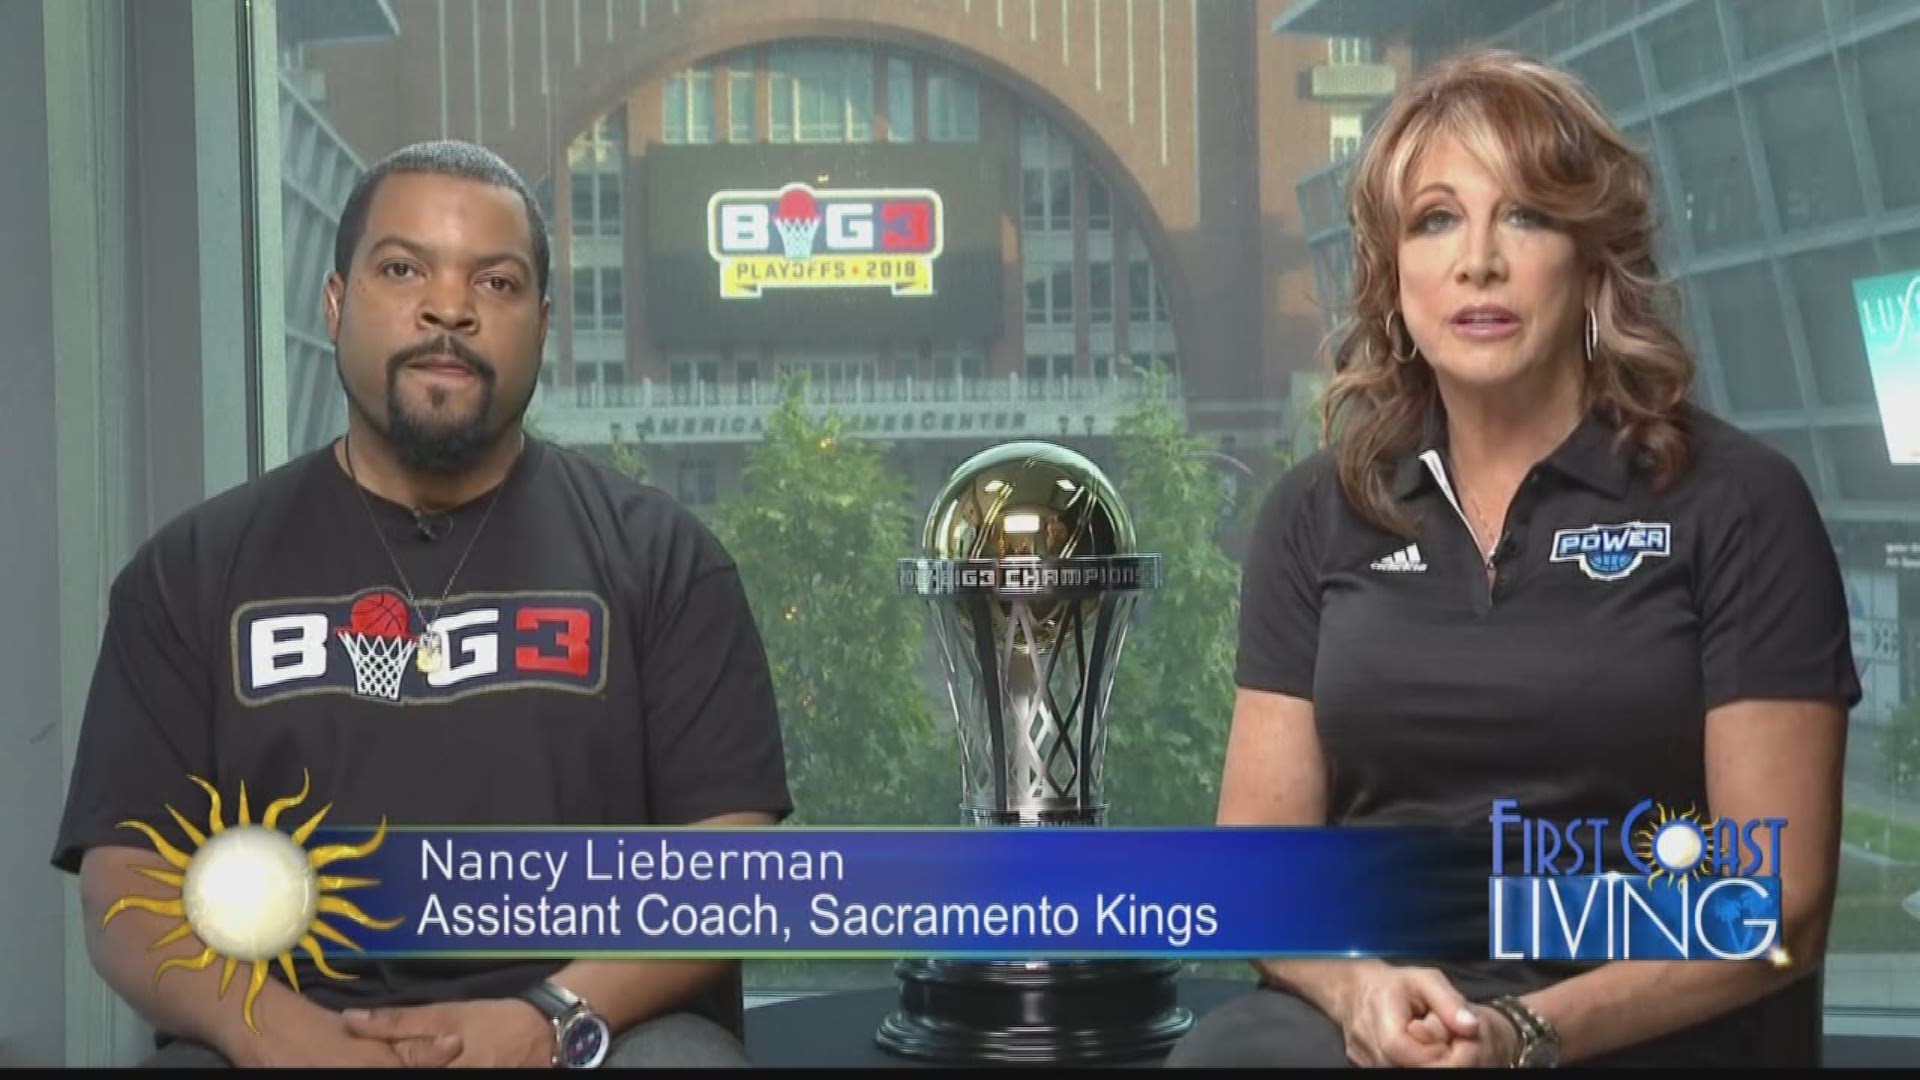 Ice Cube and Nancy Lieberman talk about the Big 3